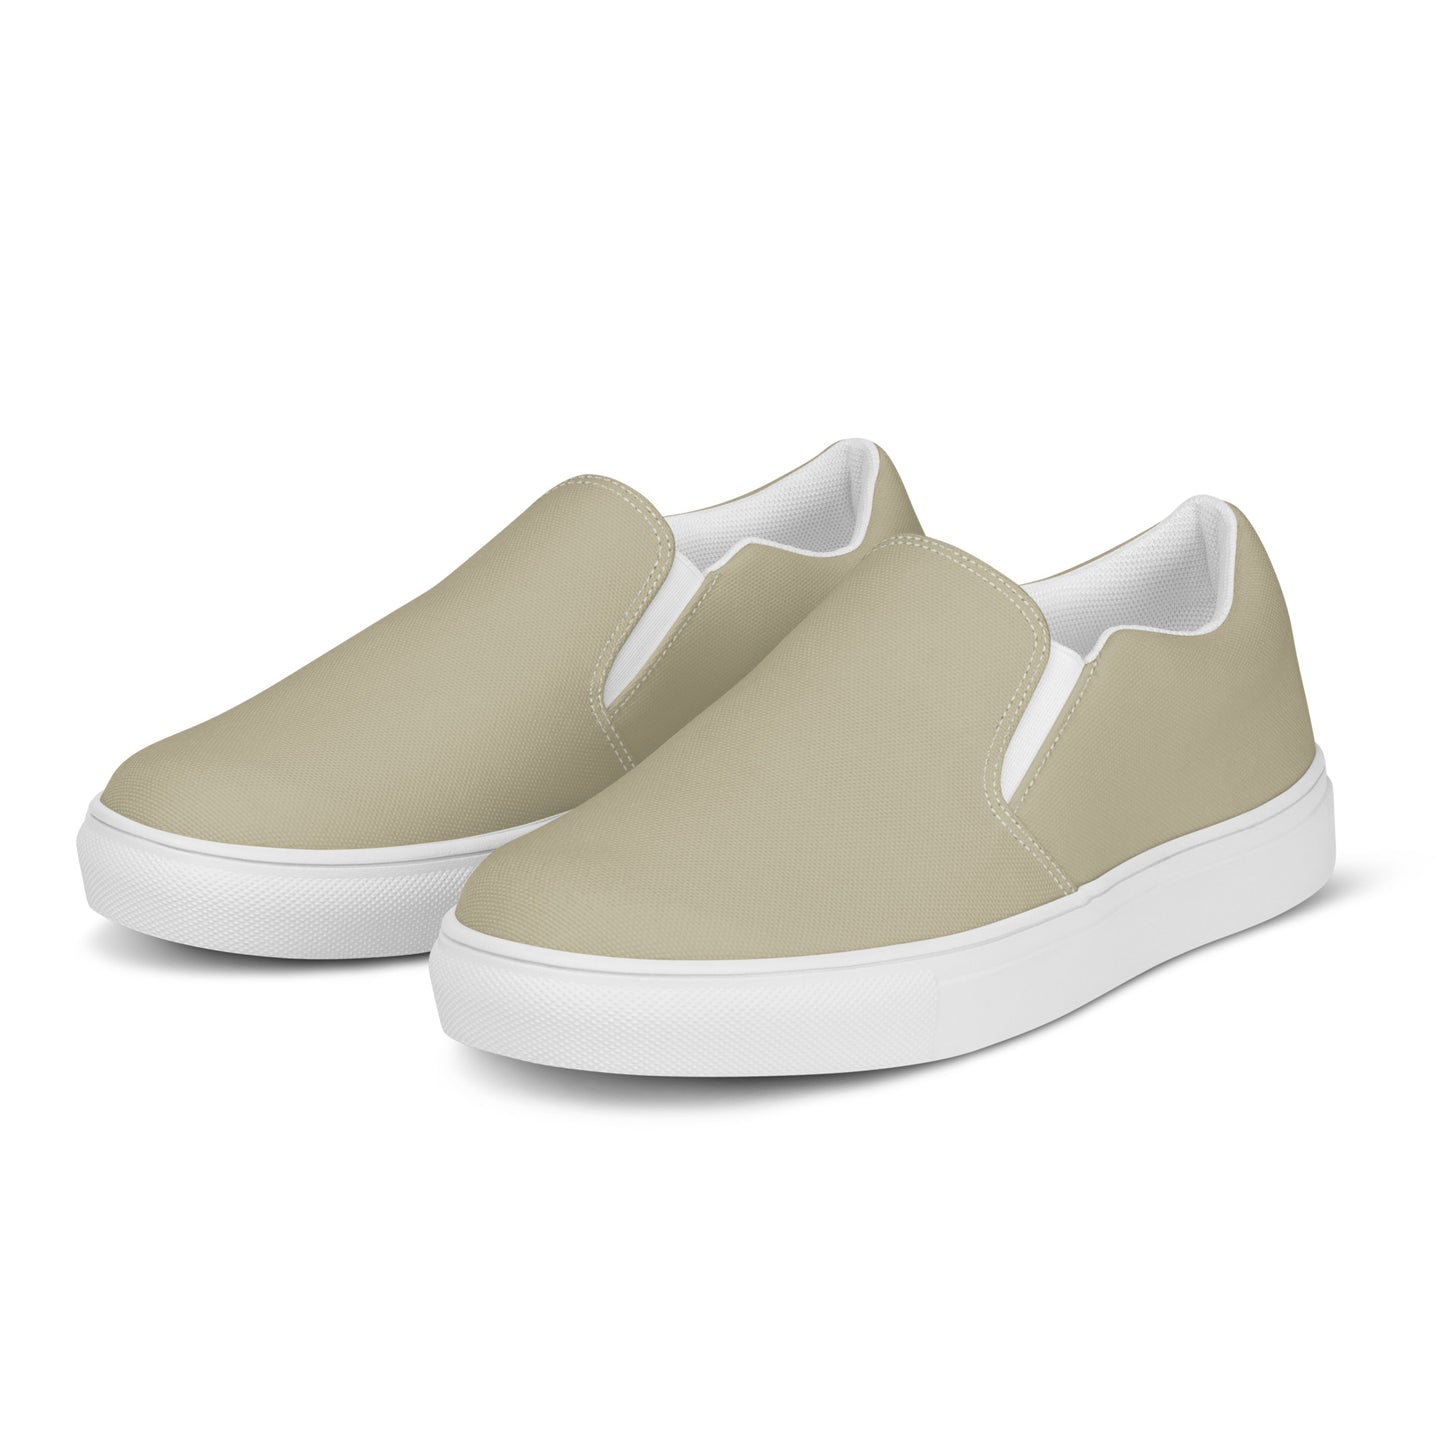 Men’s RT Caribbean Sand slip-on canvas shoes, Cruising Shoes, Boat Shoes